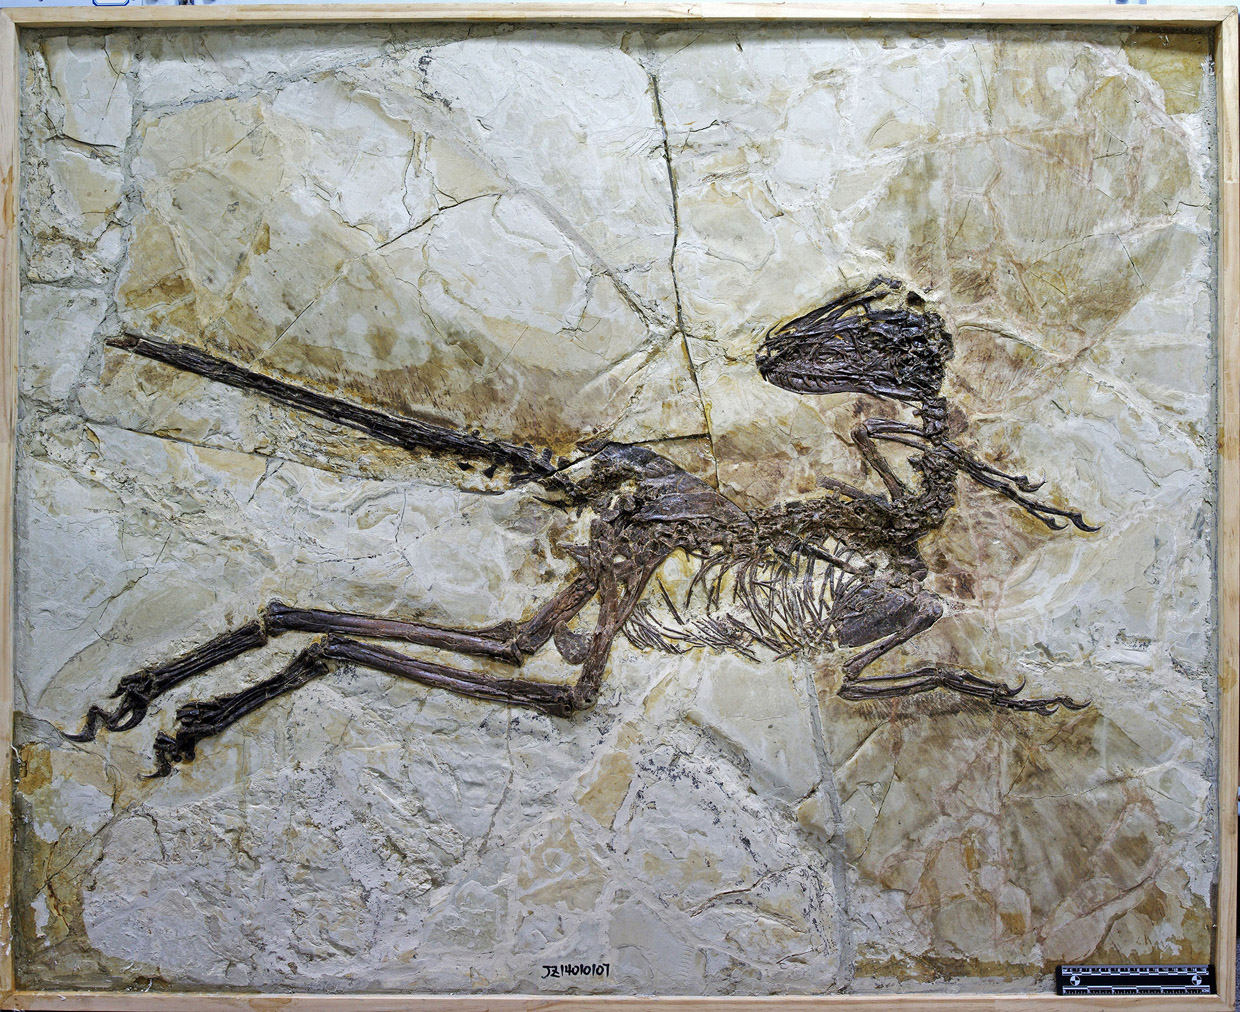 PHOTO: This is an image provided by University of Edinburgh  taken in Jinzhou, China, in 2014 and released on Thursday July 16, 2015 of the fossil of a new species of dinosaur named Zhenyuanlong suni.